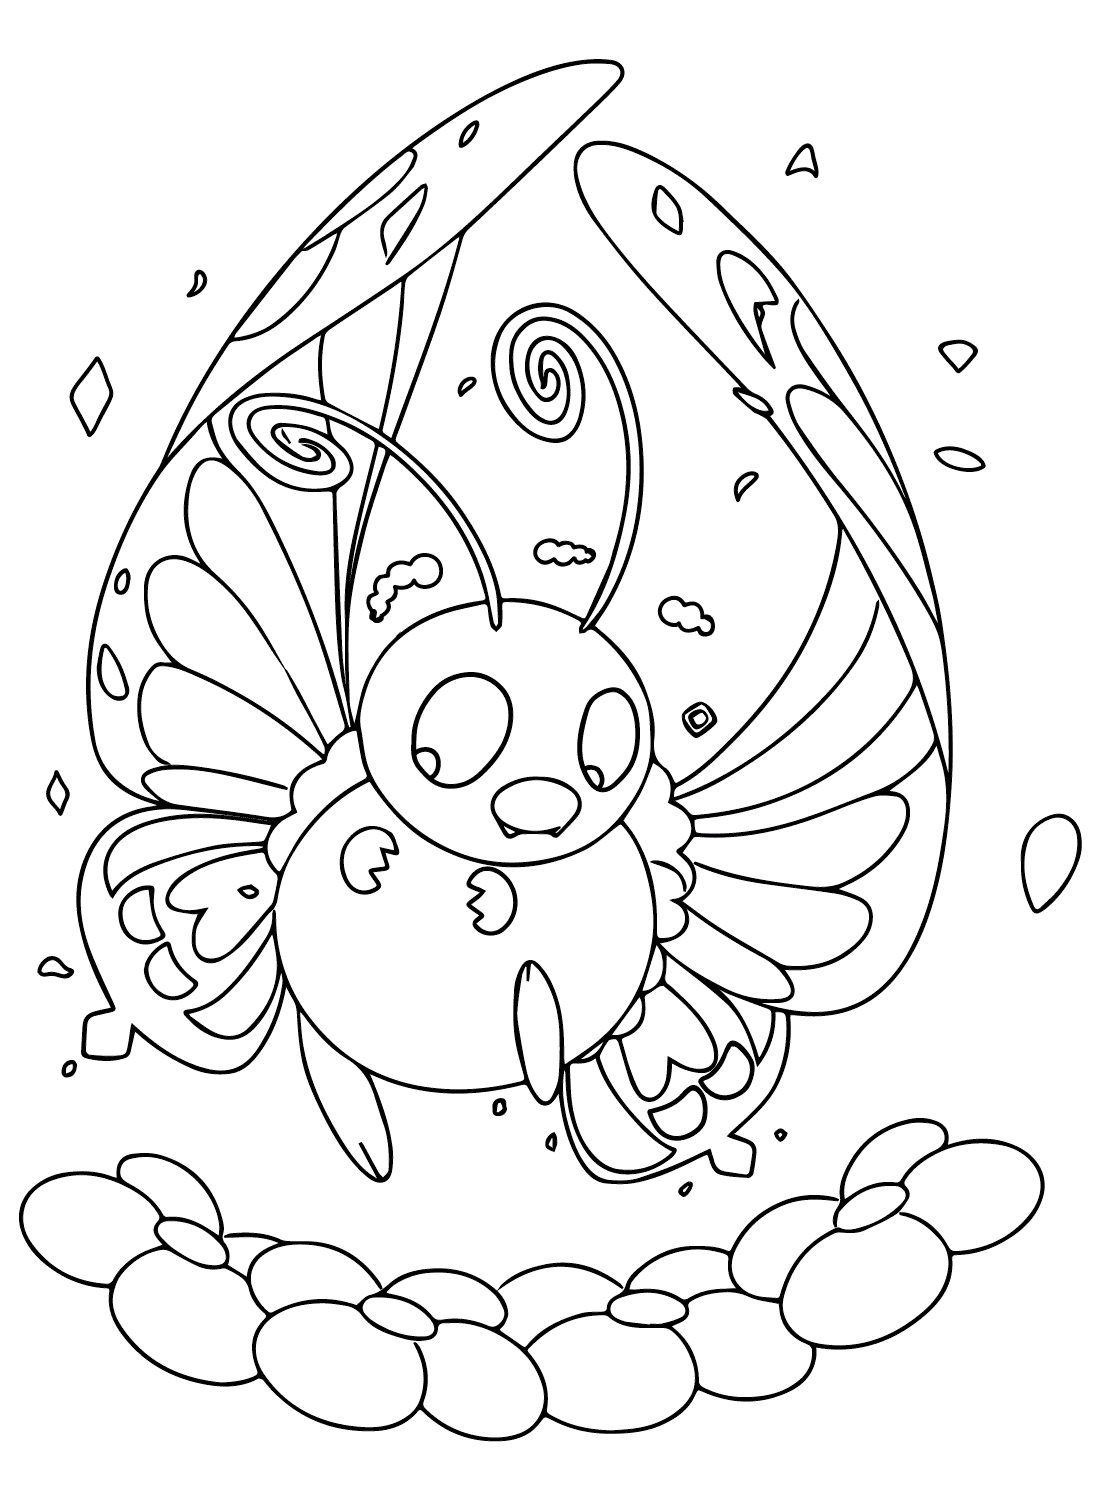 Butterfree Pokemon Images to Color from Butterfree